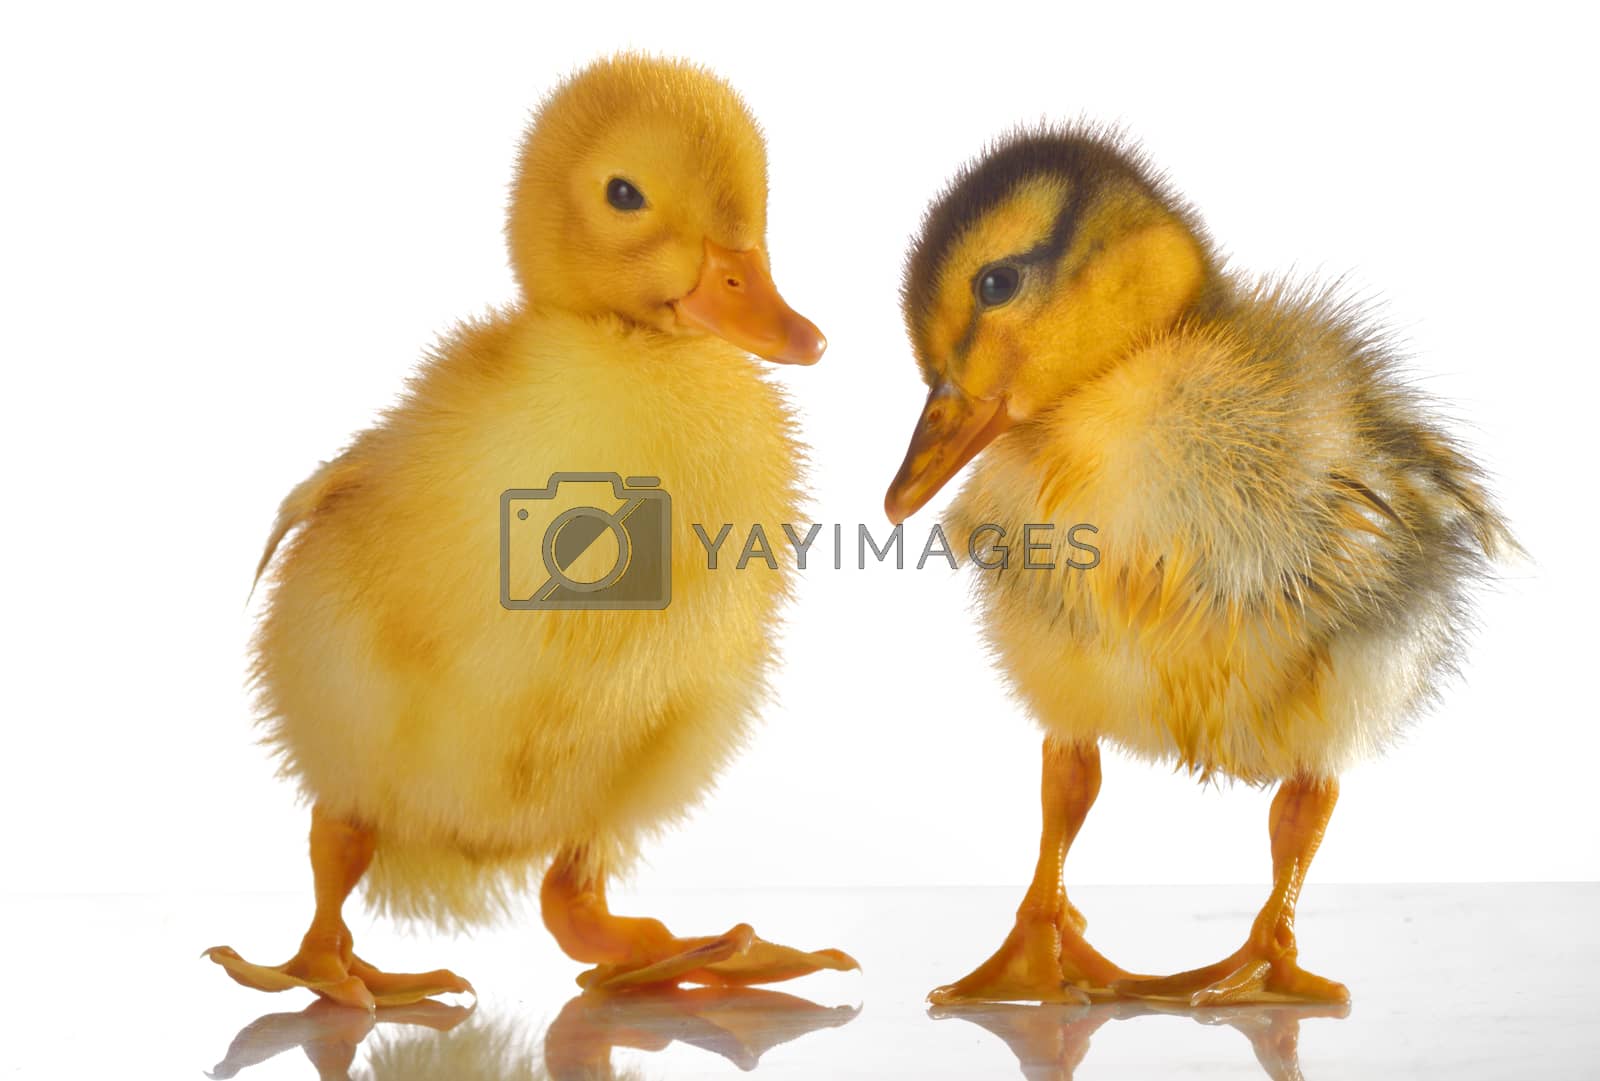 Royalty free image of two yellow duck  by mady70